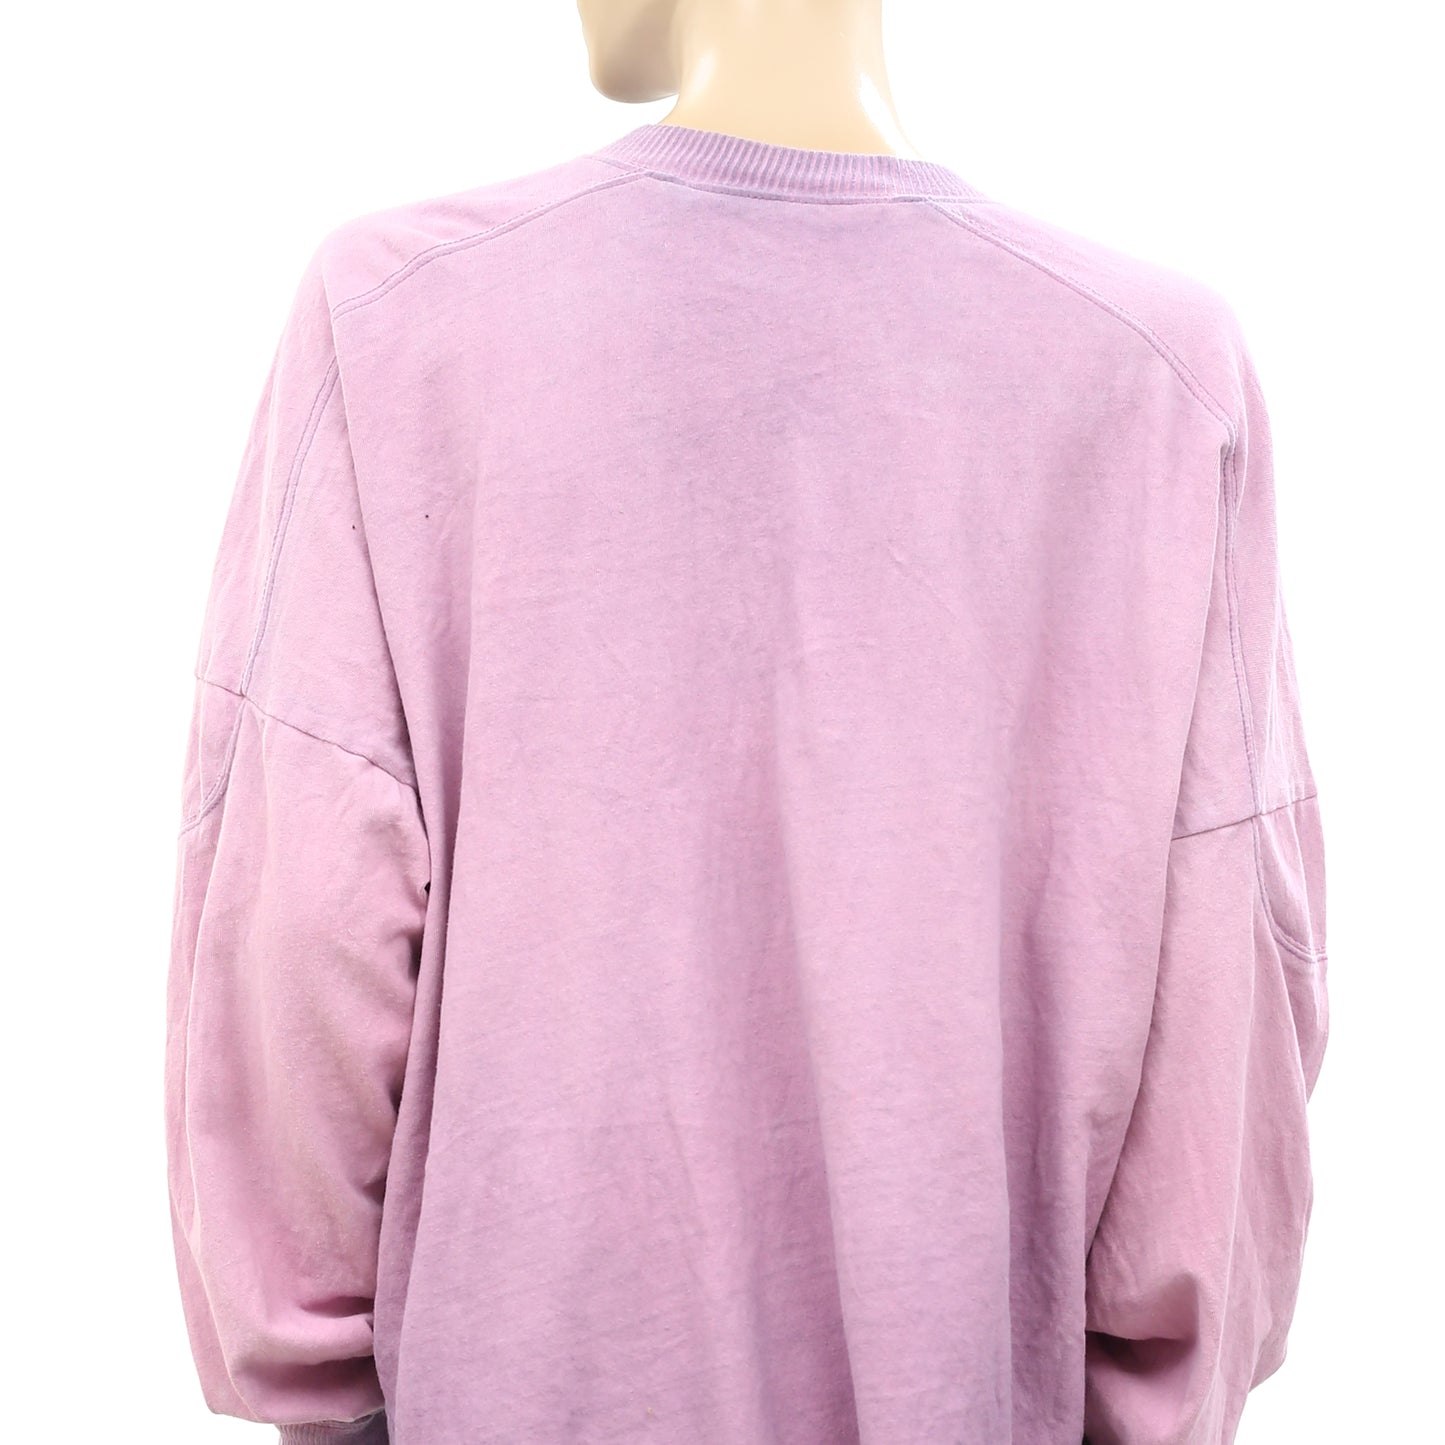 BDG Urban Outfitters Asher Oversized Henley Shirt Top